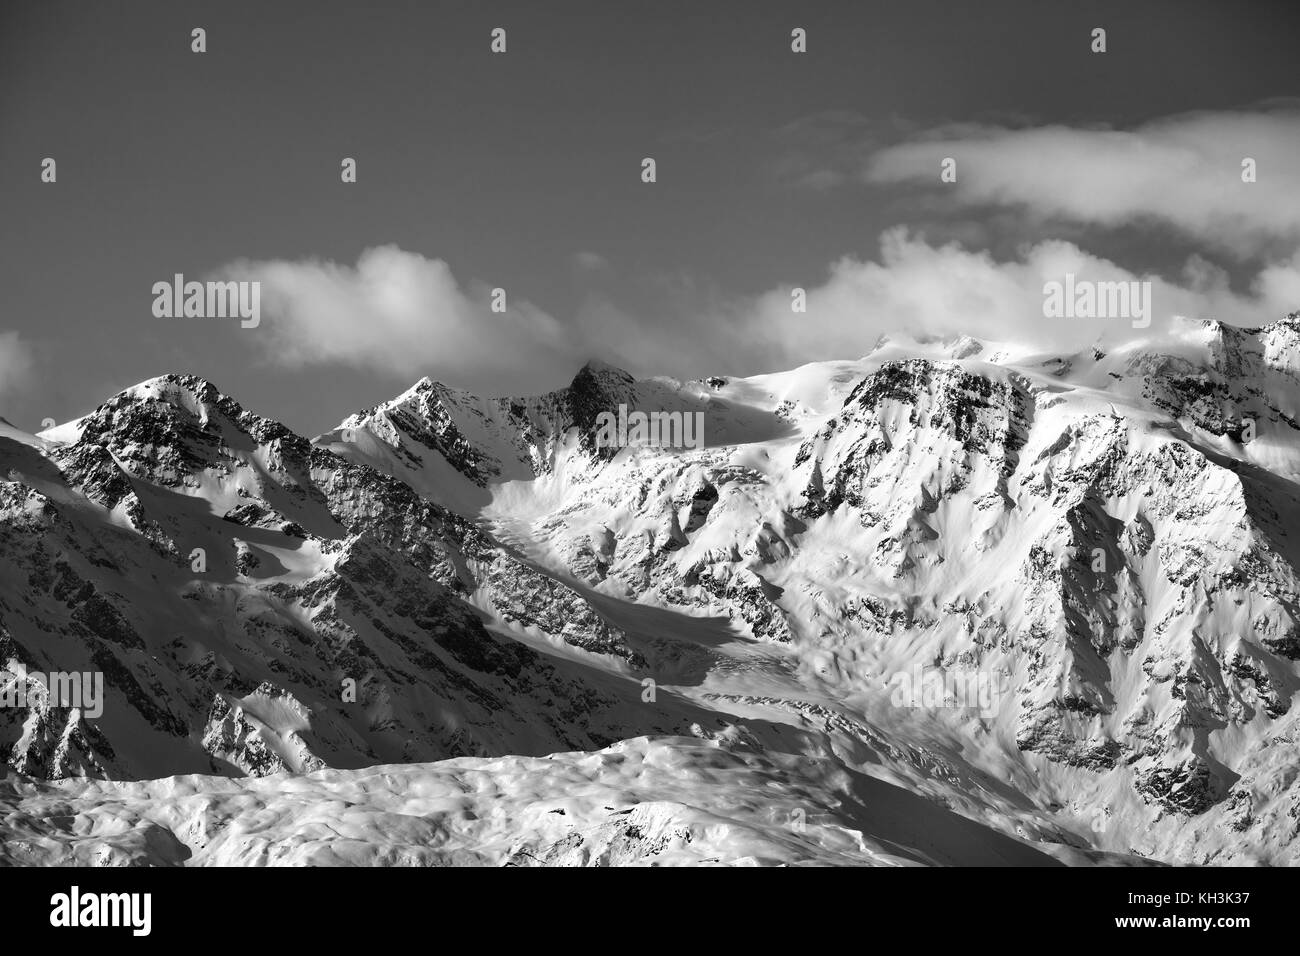 Black and white snow mountains and glacier at sunny evening. Caucasus Mountains in winter. Svaneti region of Georgia. Stock Photo